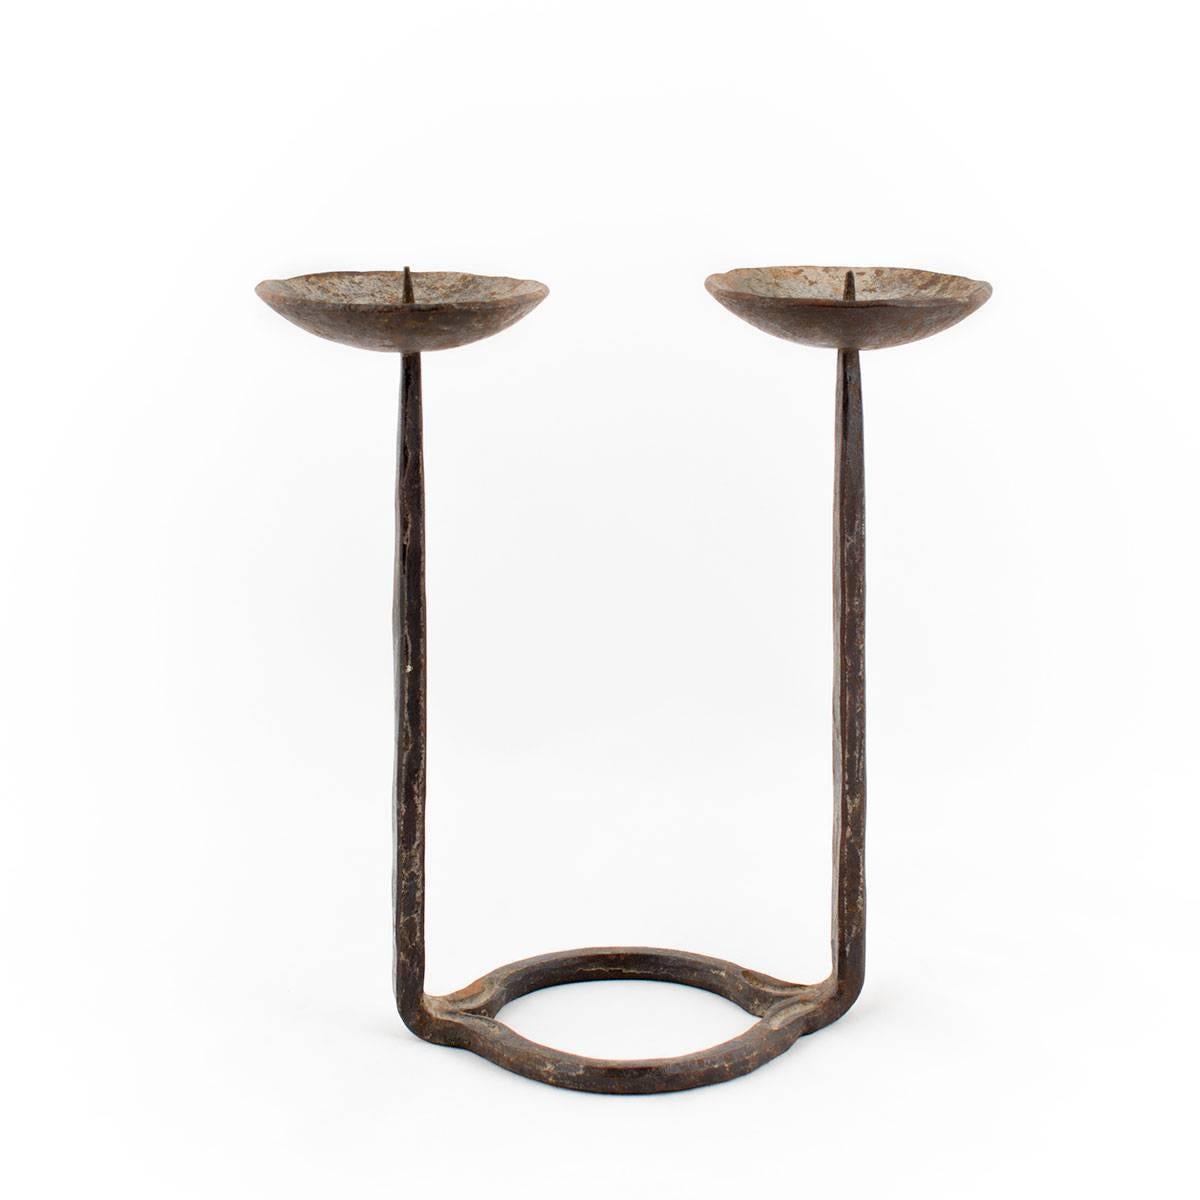 Hand Forged Iron Candelabra 
Holocaust Memorial Judaic Candle Stick Sculpture


David Palombo was an Israeli sculptor and painter. He was born in Turkey and immigrated to the Land of Israel with his parents in 1923. In 1940 he began his studies at